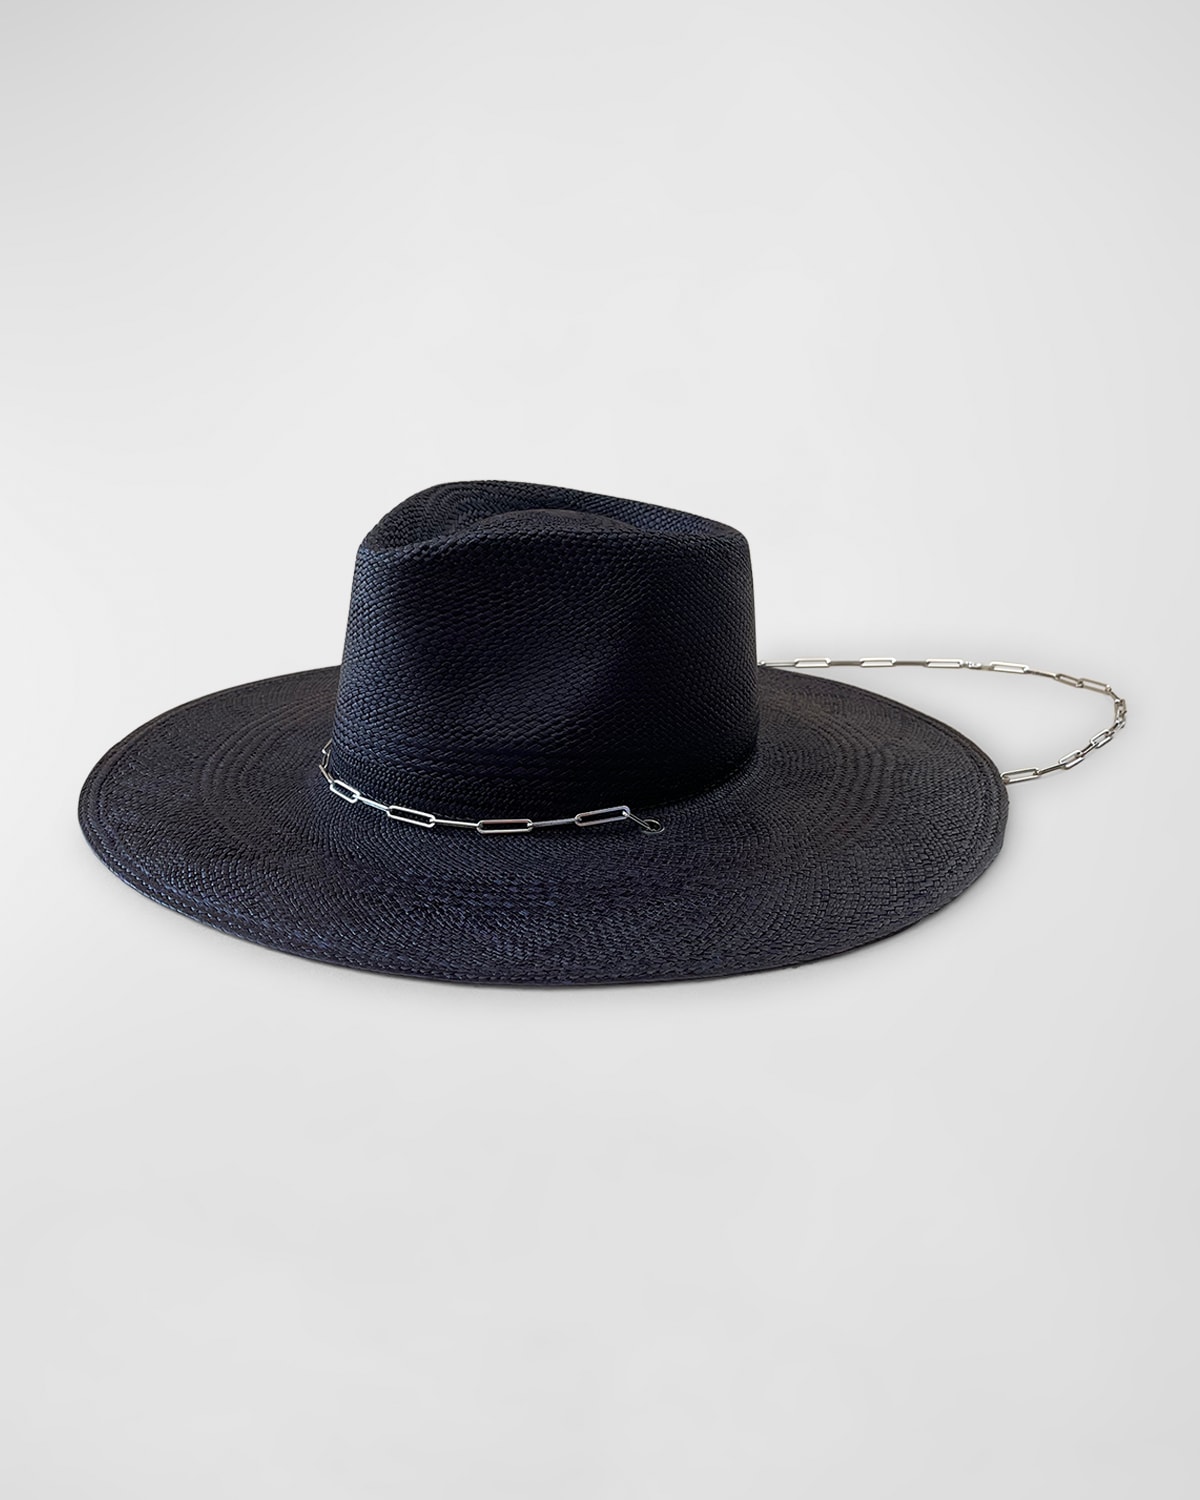 Livy Jr Straw Fedora With Paper Clip Chain